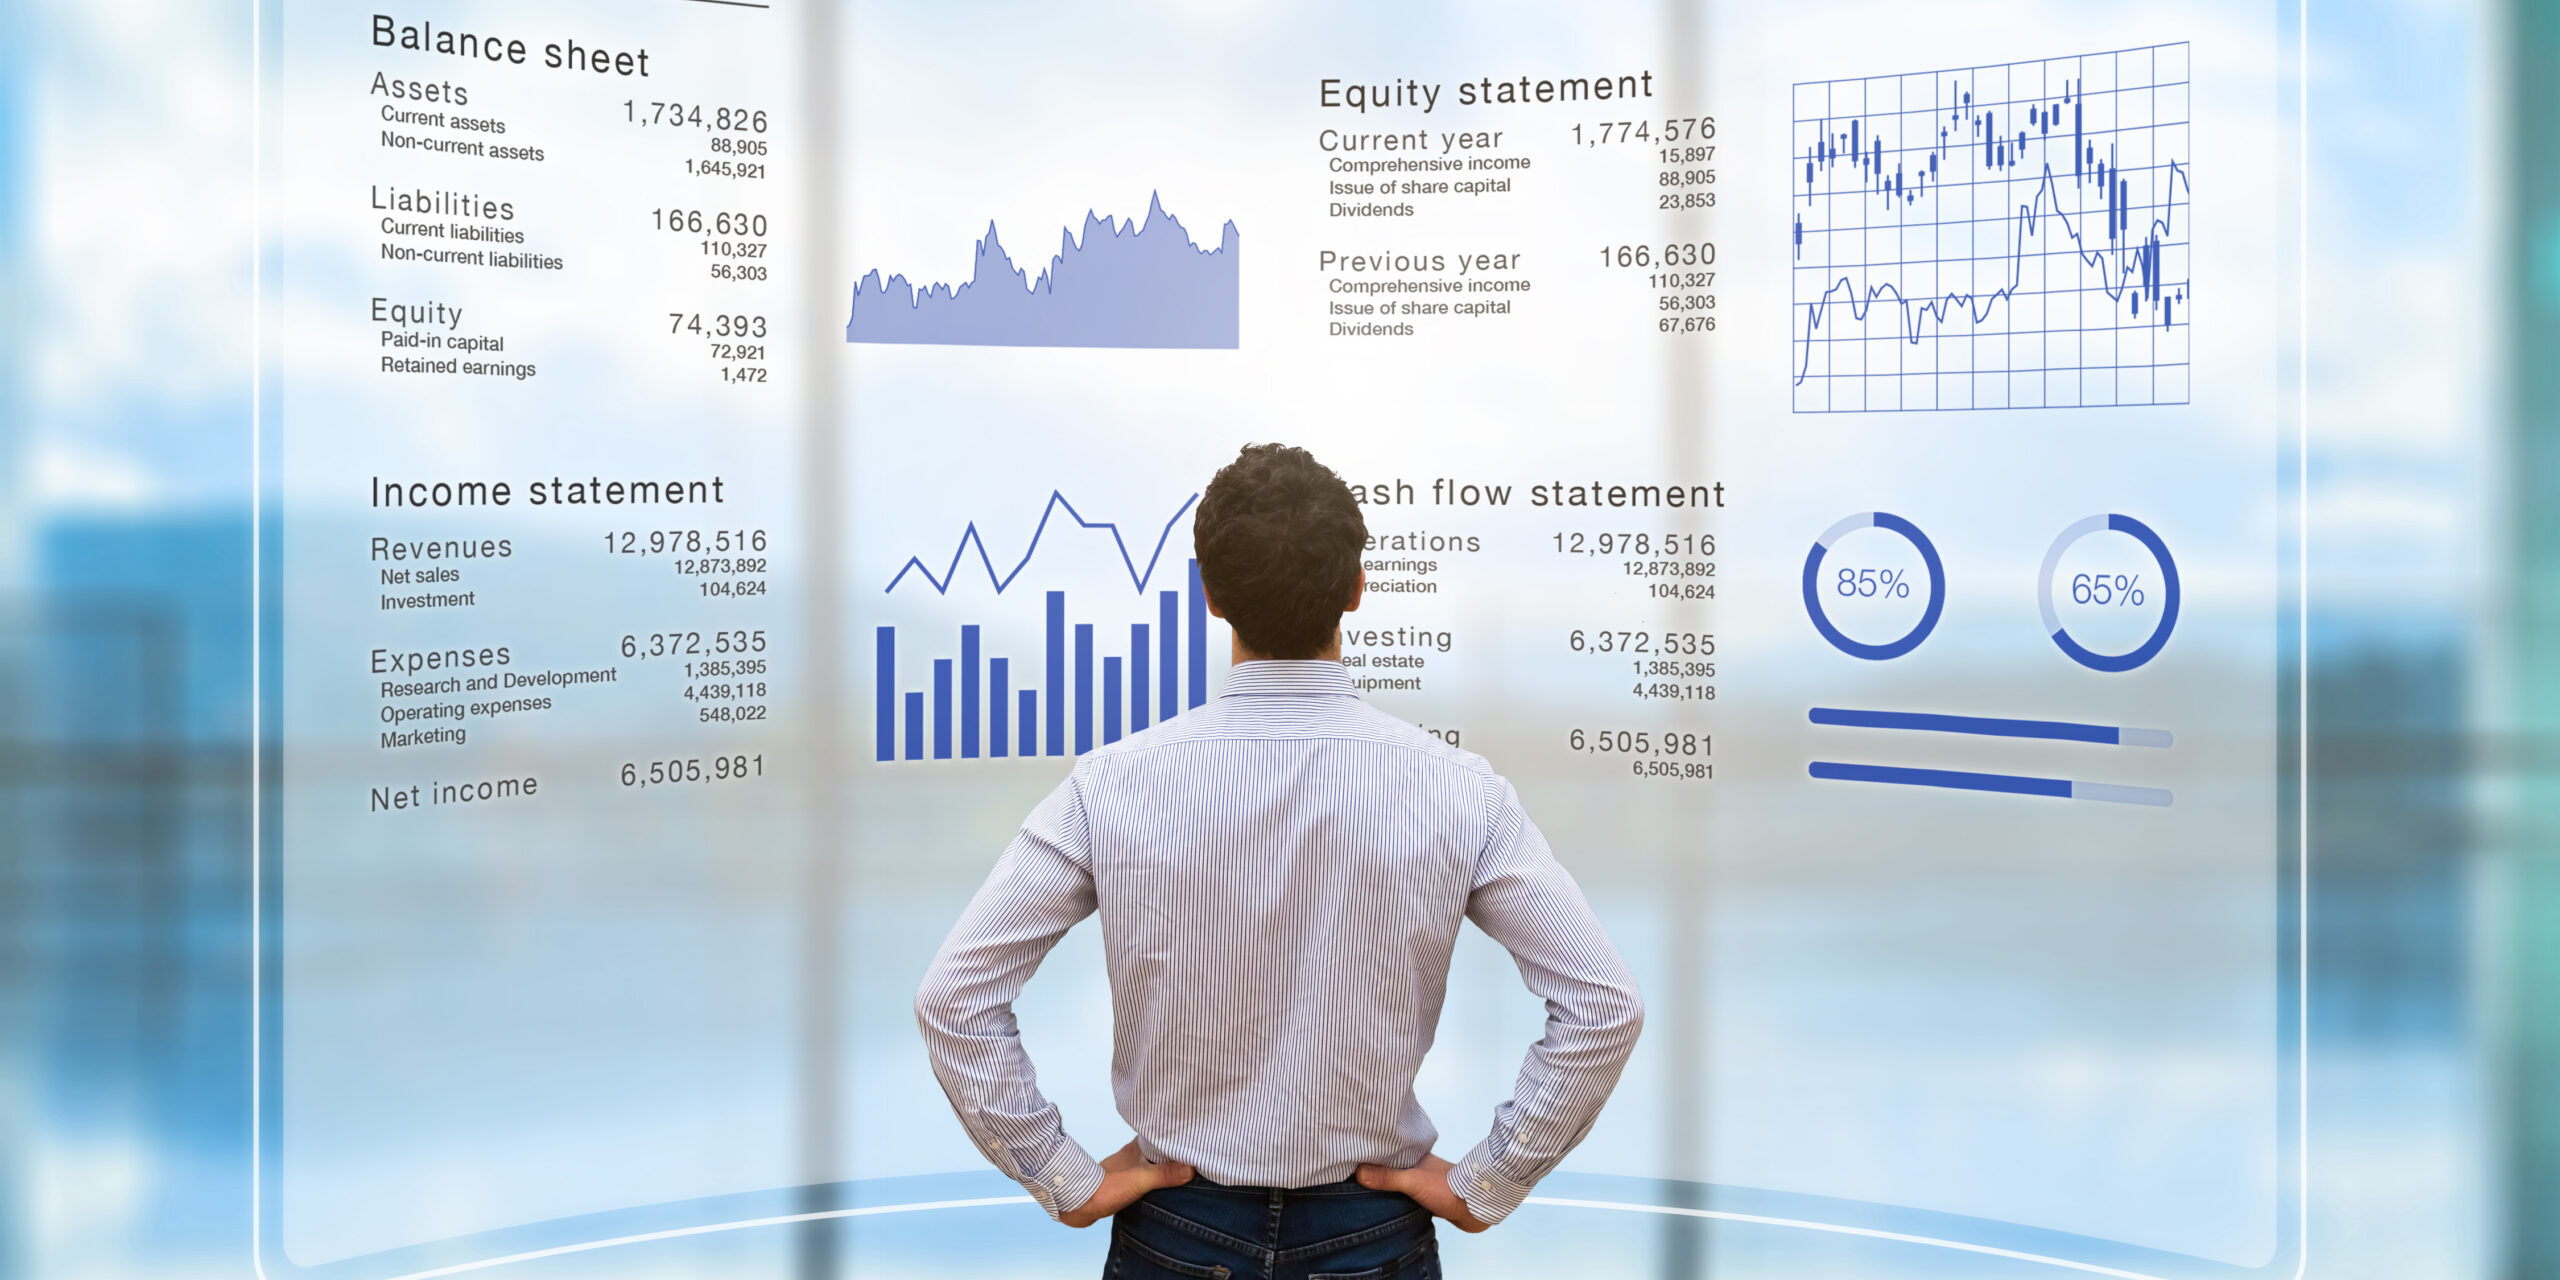 Advanced Financial Statements Analysis for Corporate Performance Evaluation